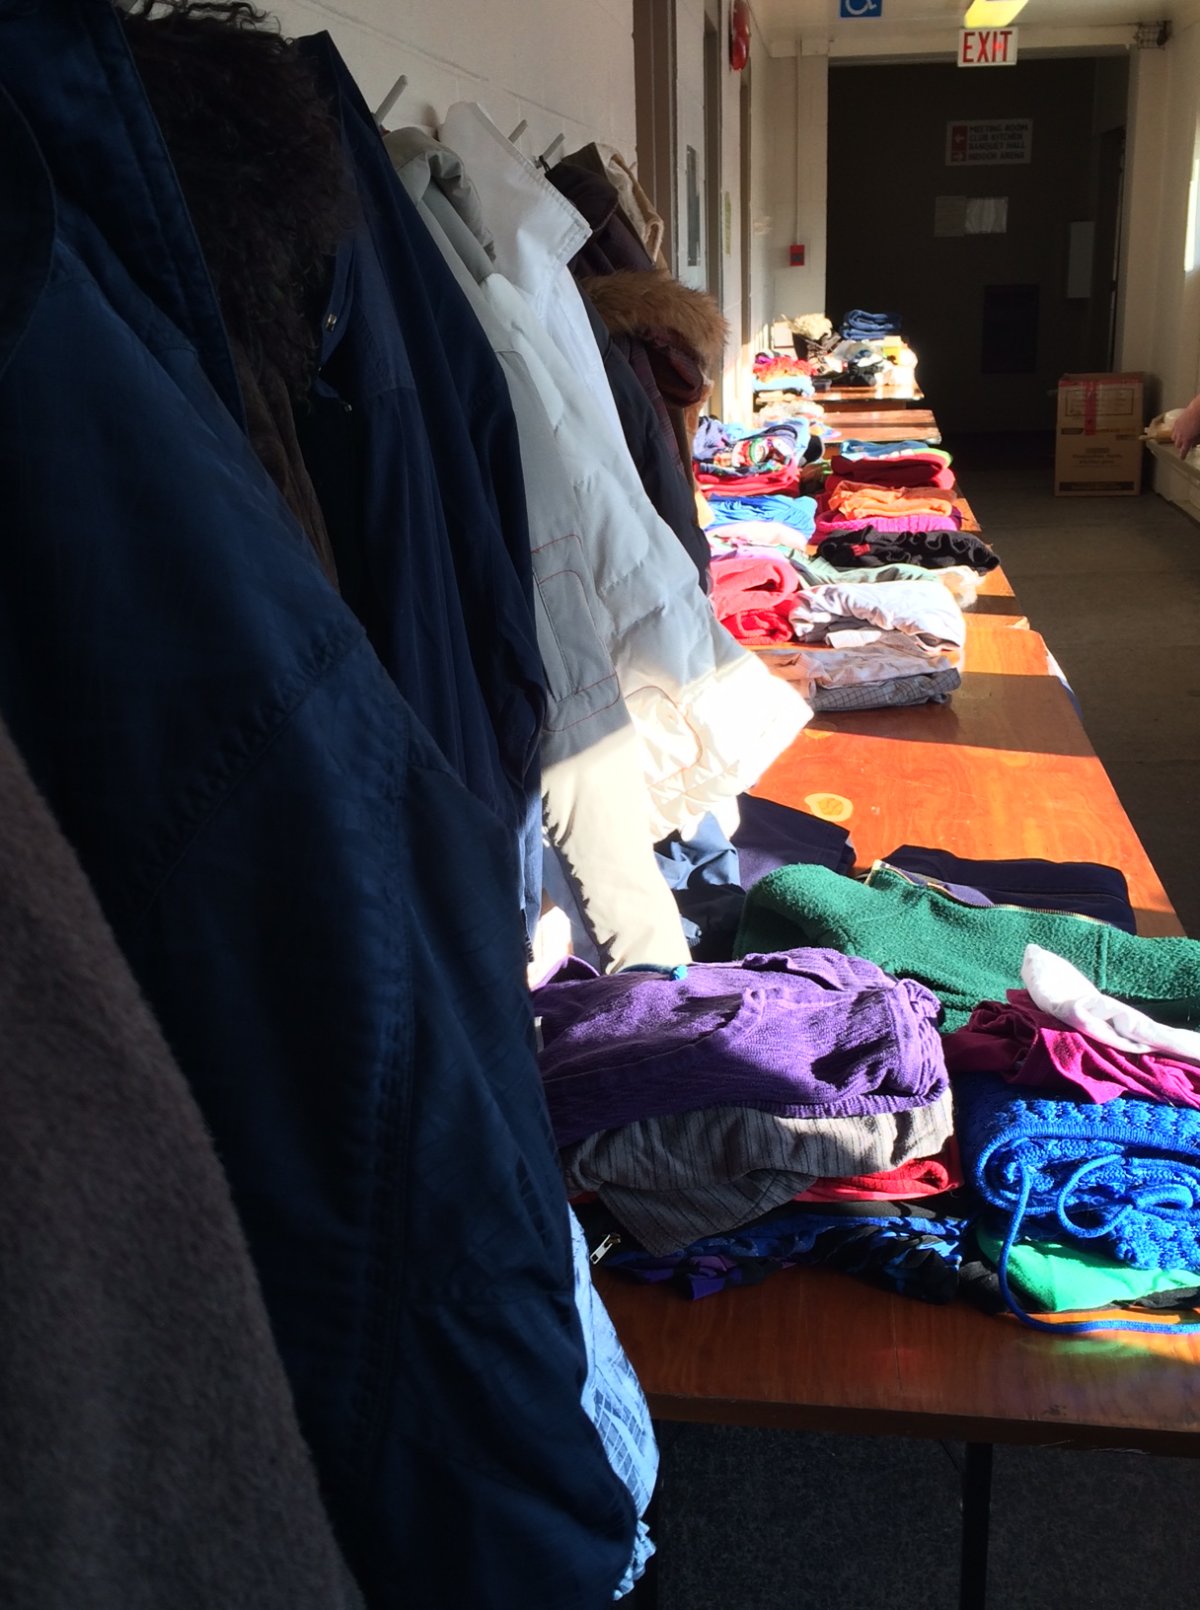 Donations pile up at the St. Norbert Community Centre for the two families who lost their homes in a fire Wednesday.